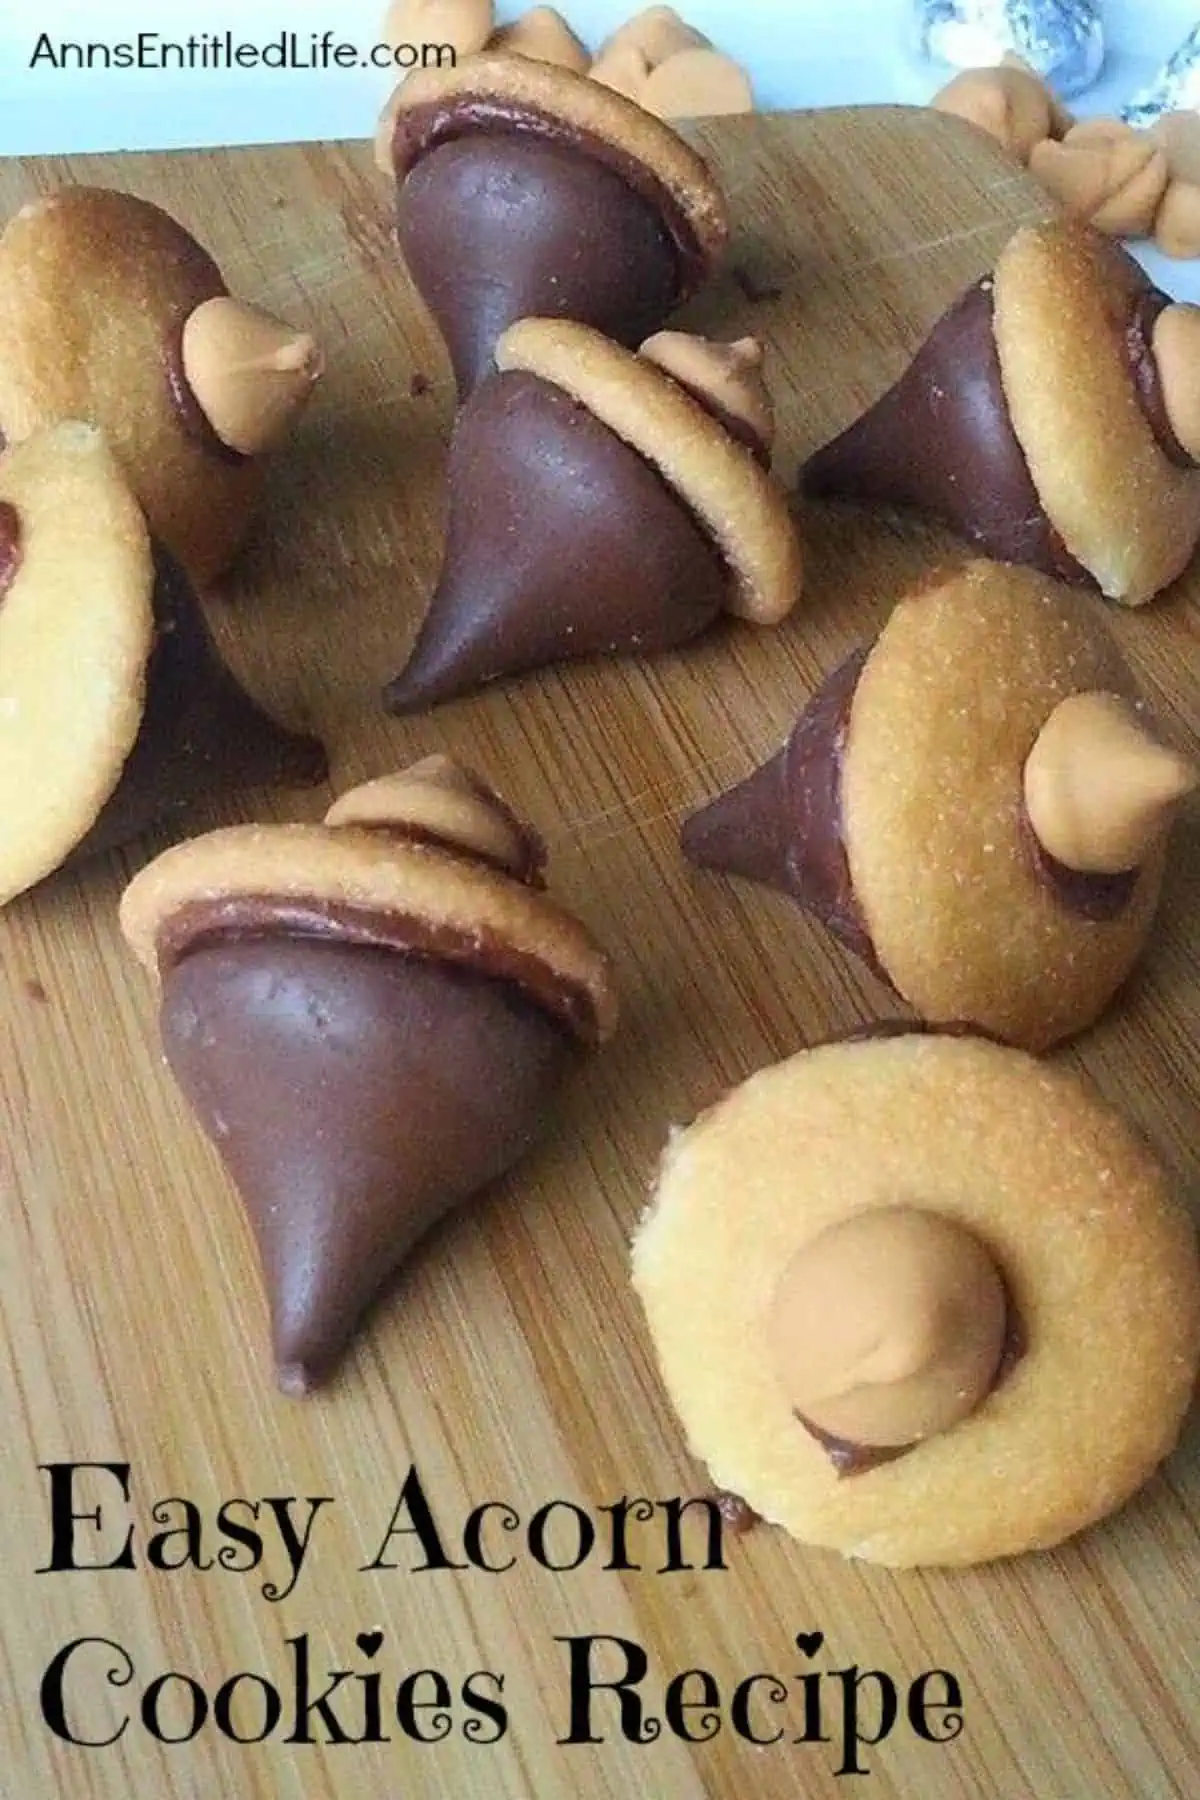 chocolate kisses and cookies put together in the shape of an acorn for an adorable fall snack